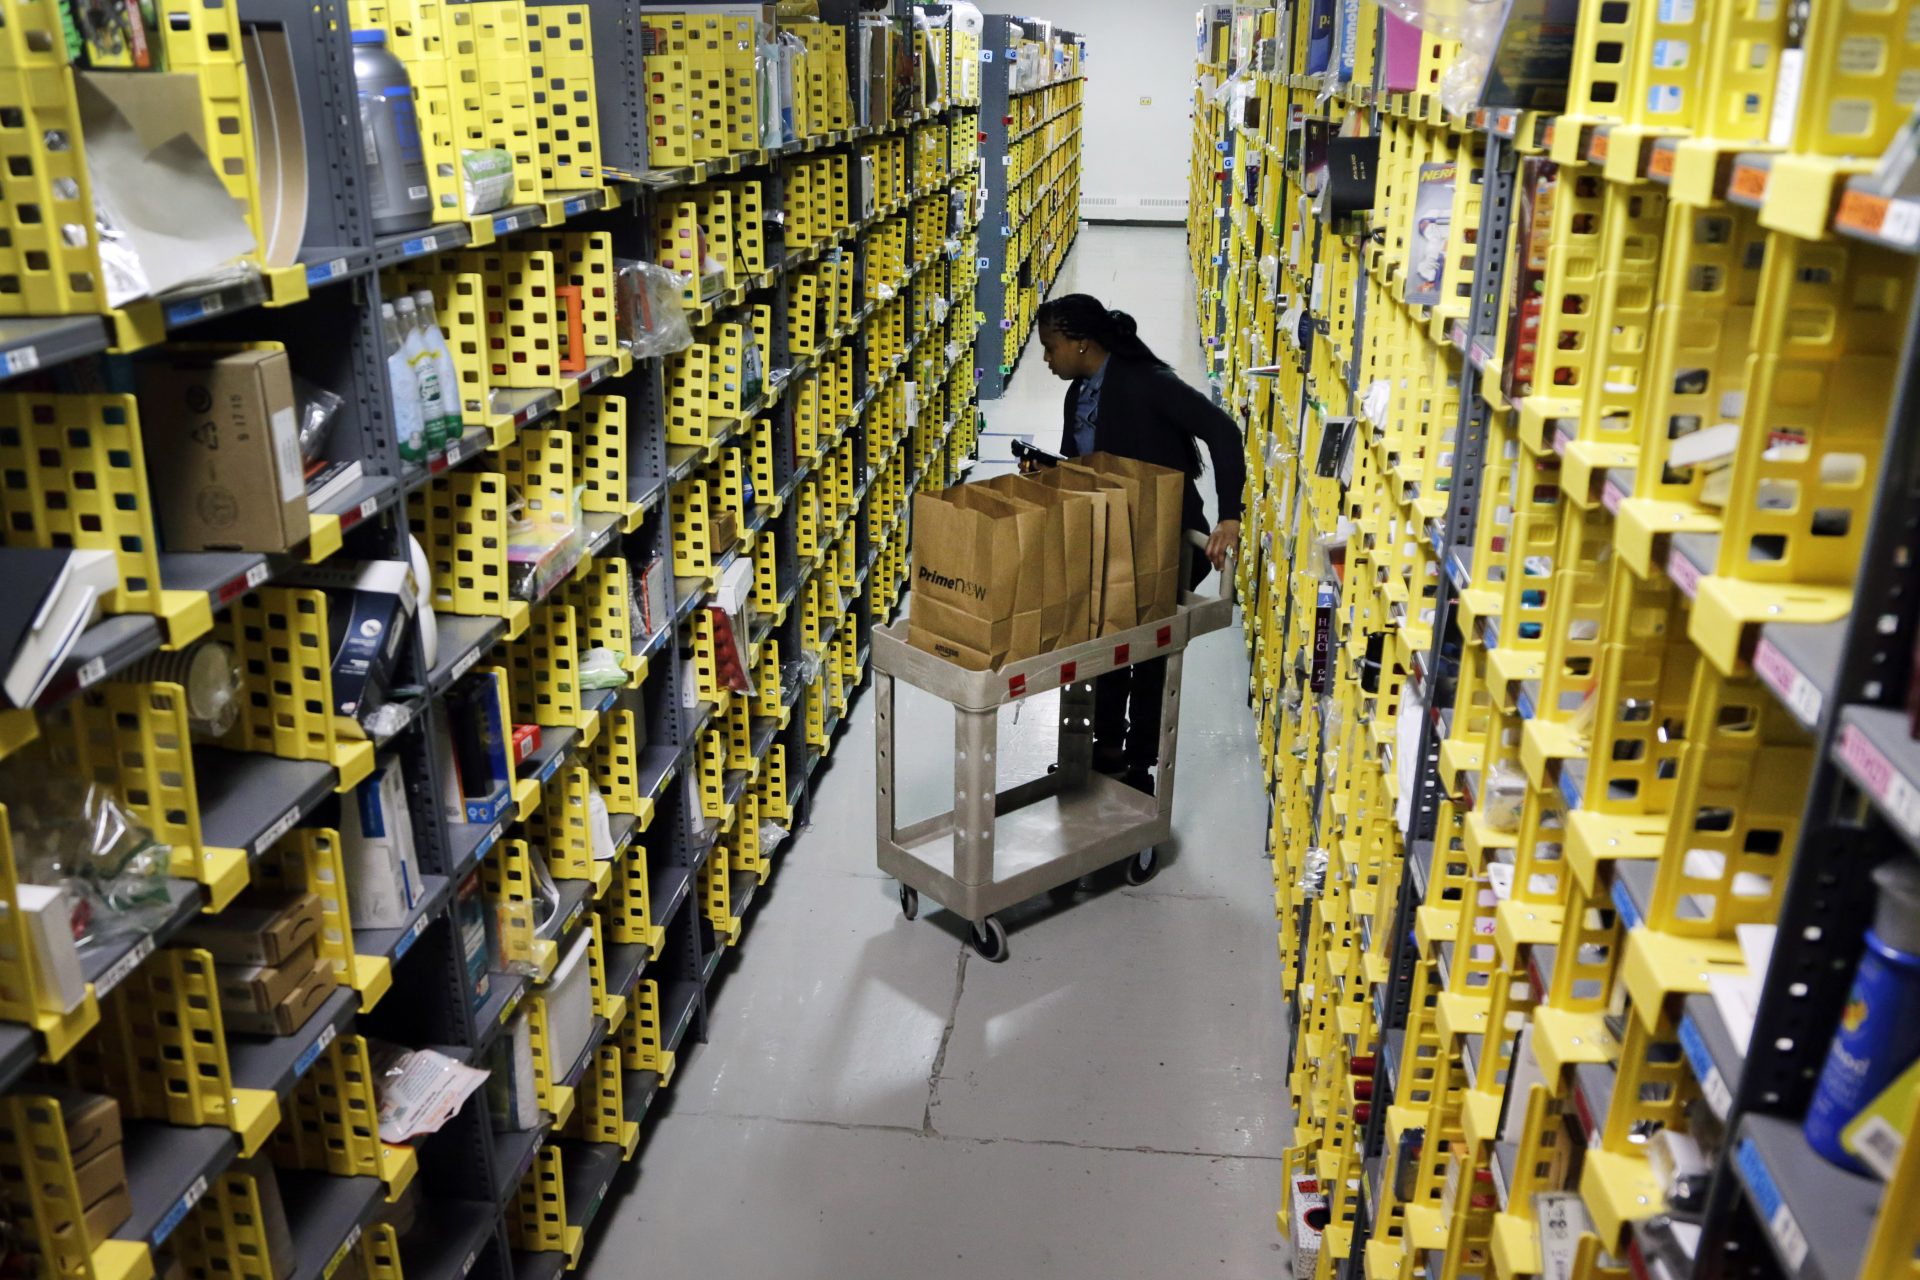 Amazon Prime employee Alicia Jackson hunts for items at the company's urban fulfillment facility that have been ordered by customers, Tuesday, Dec. 22, 2015, in New York.